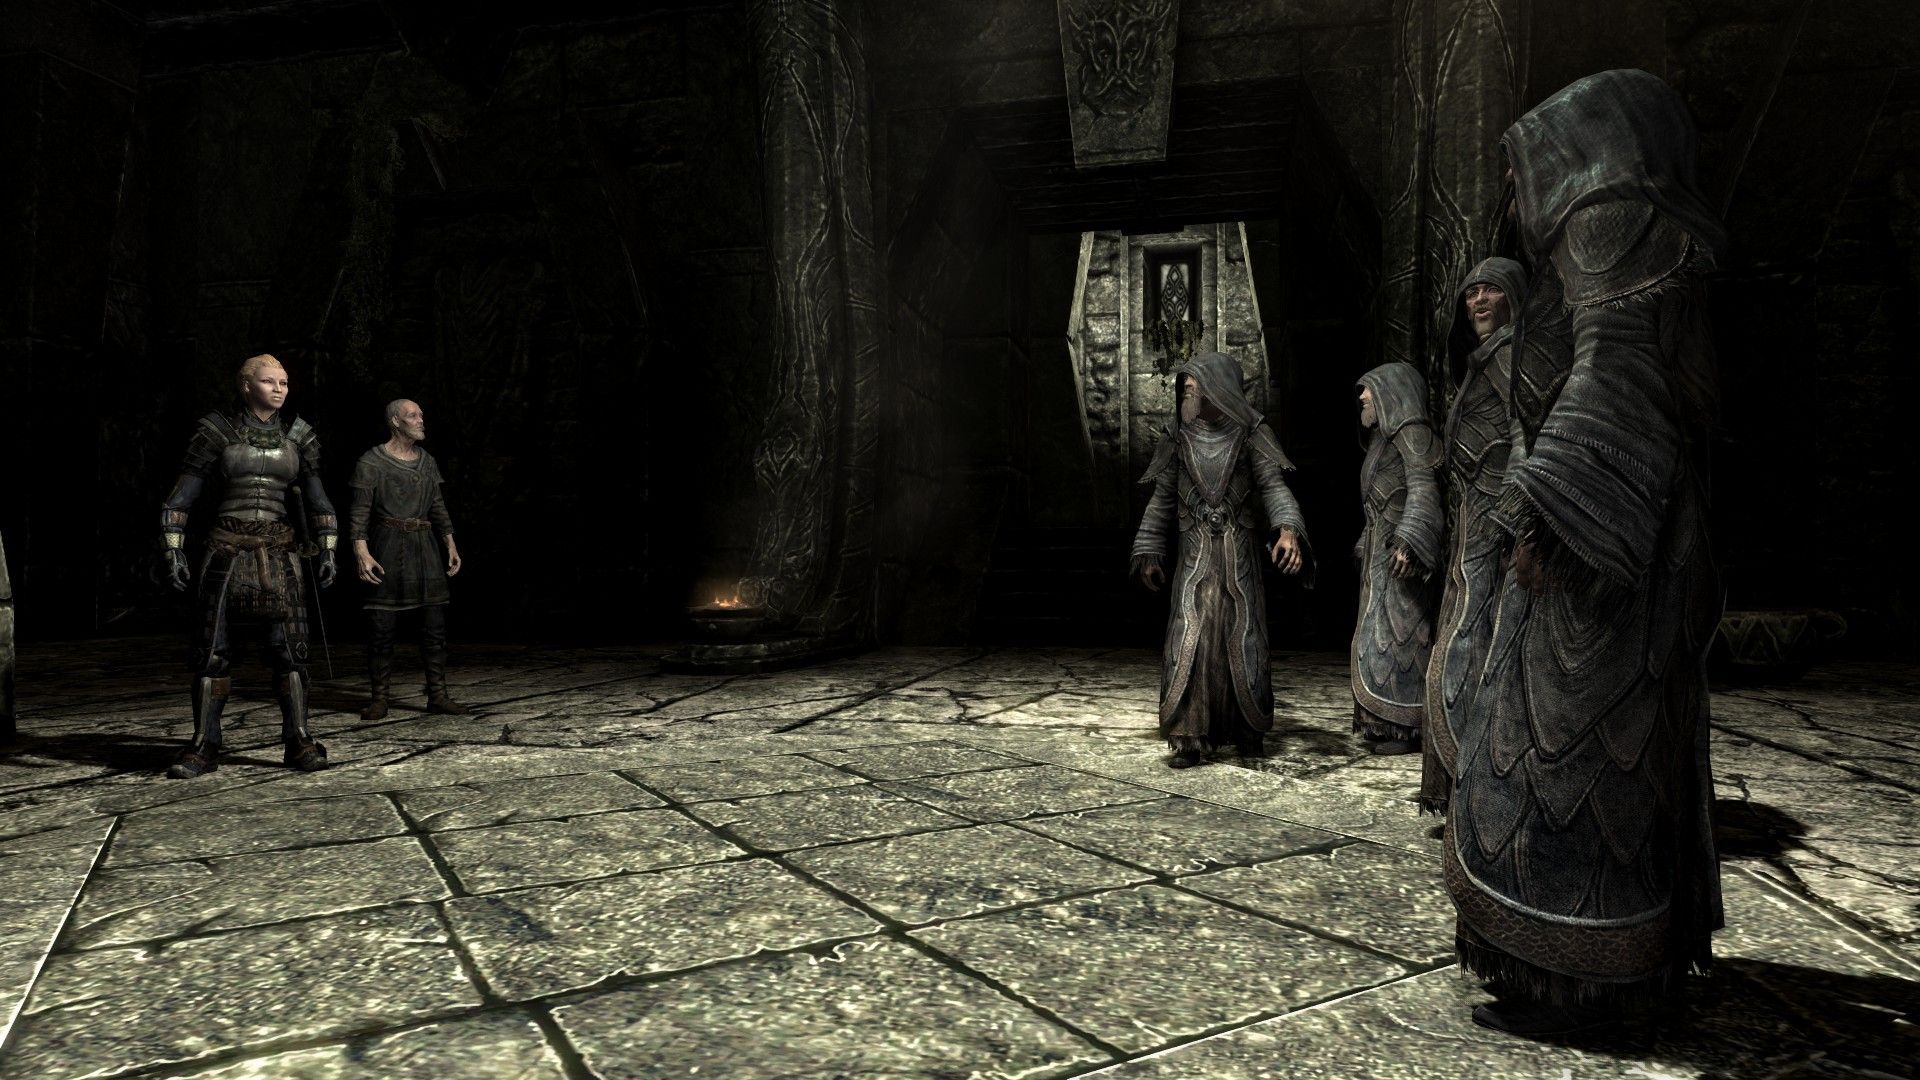 An armored woman and an old man confront monks in a stone monastery